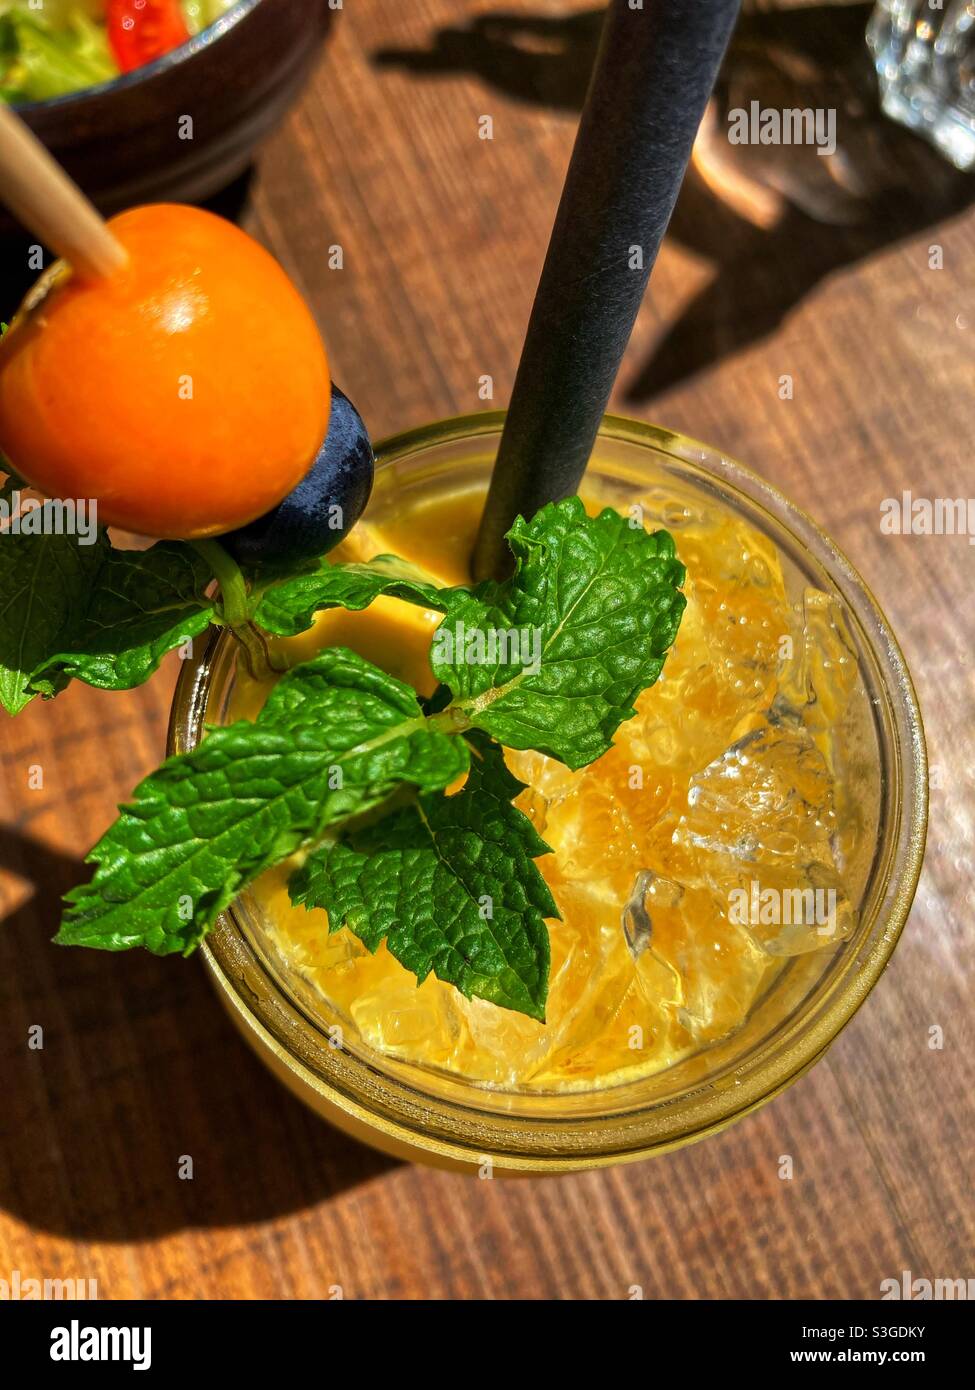 A Cold Orange Drink decorated with mint leaves and a Plastic straw Stock Photo